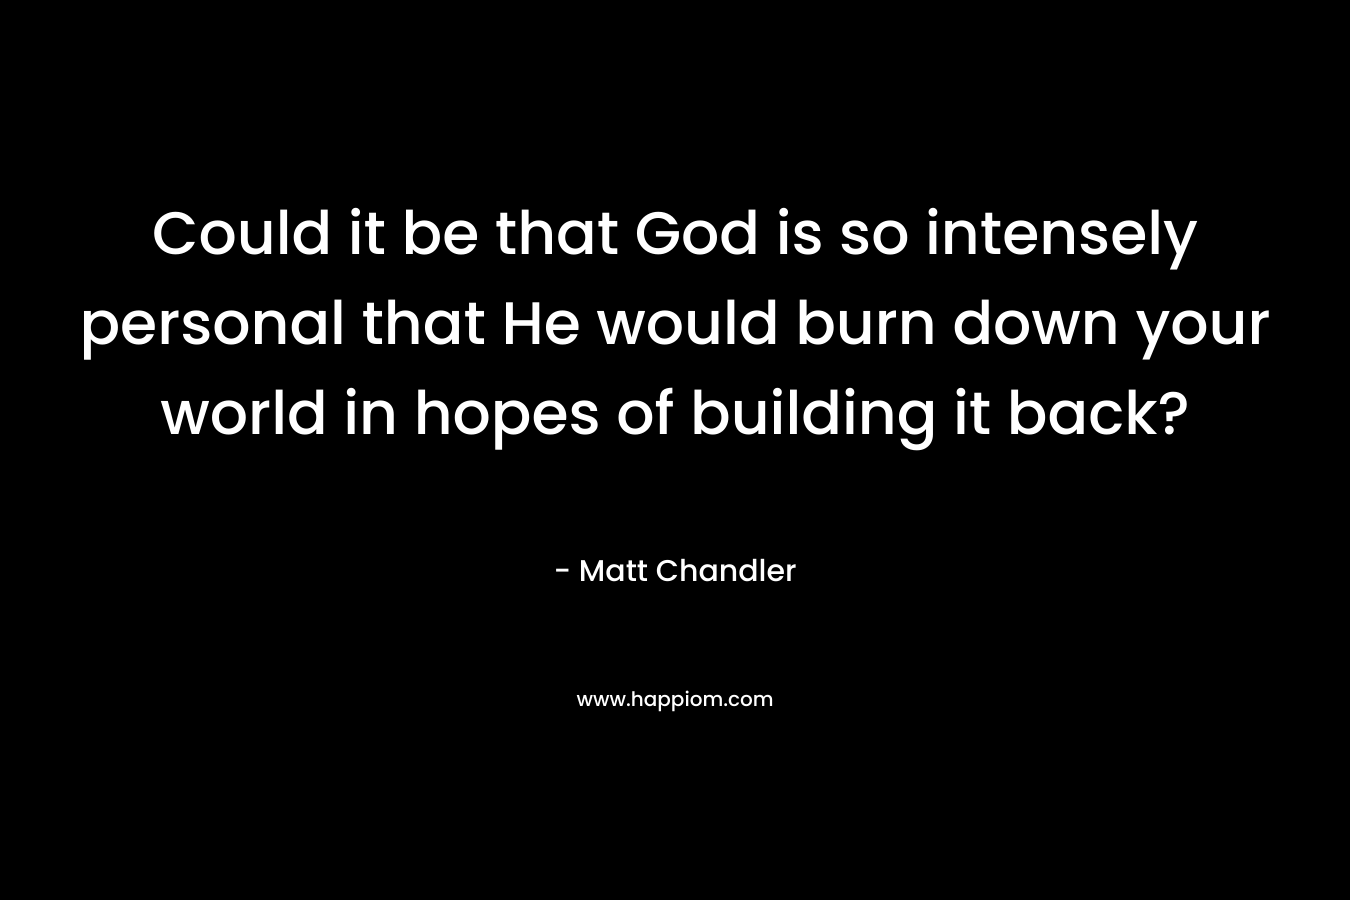 Could it be that God is so intensely personal that He would burn down your world in hopes of building it back?